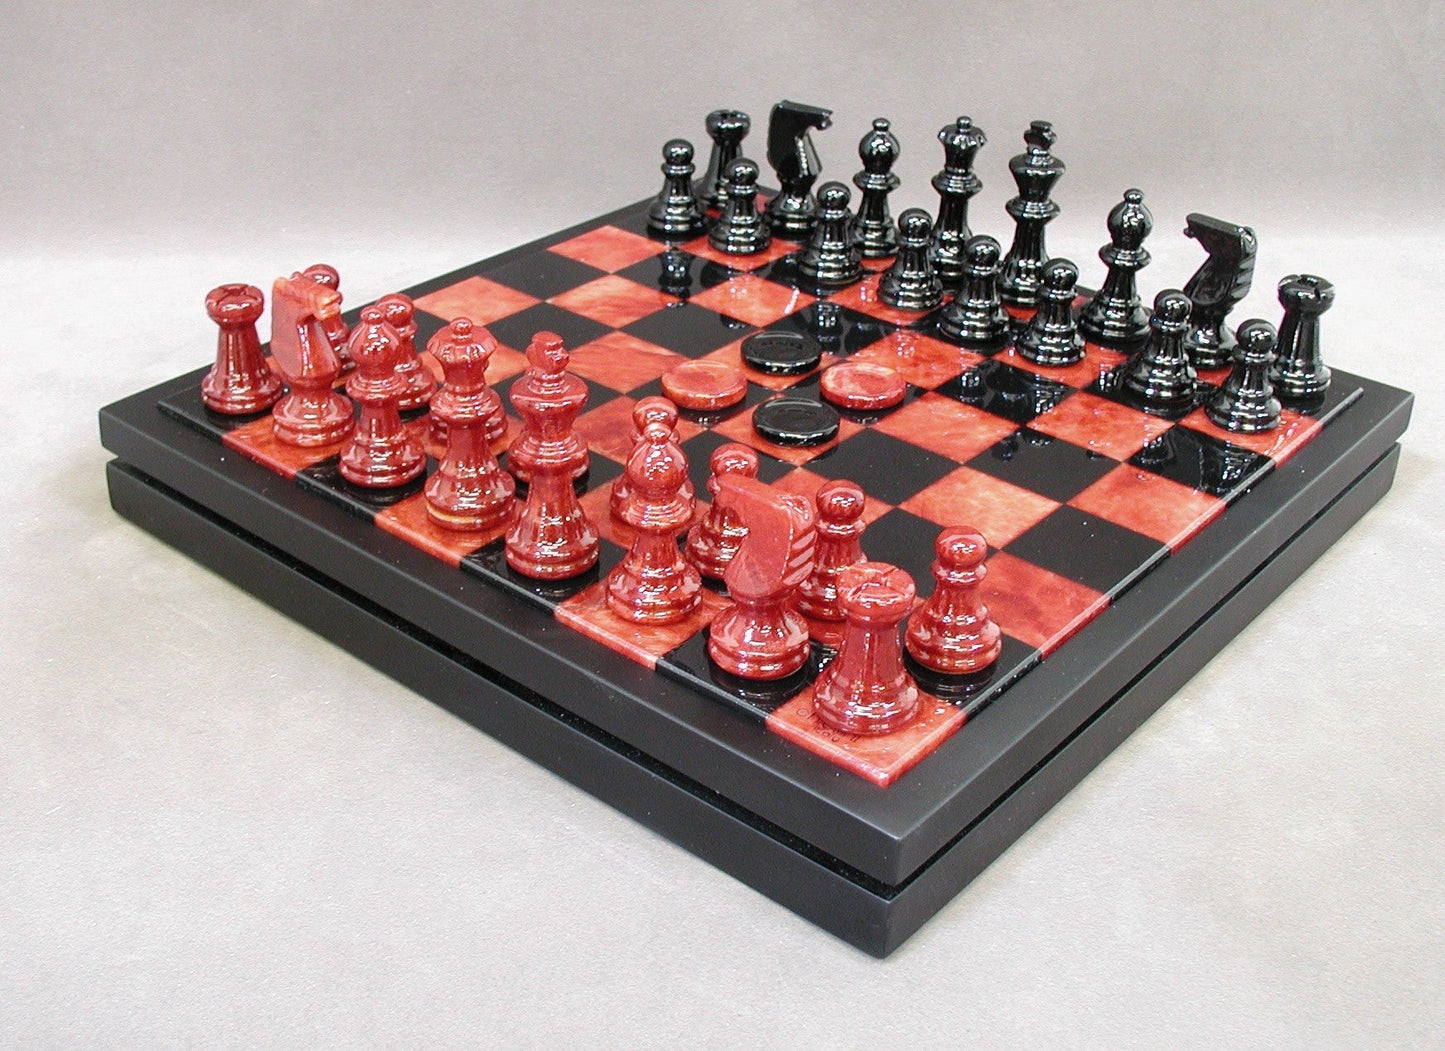 14 inch Alabaster Chest Chess Set with Checkers (Black & Red)